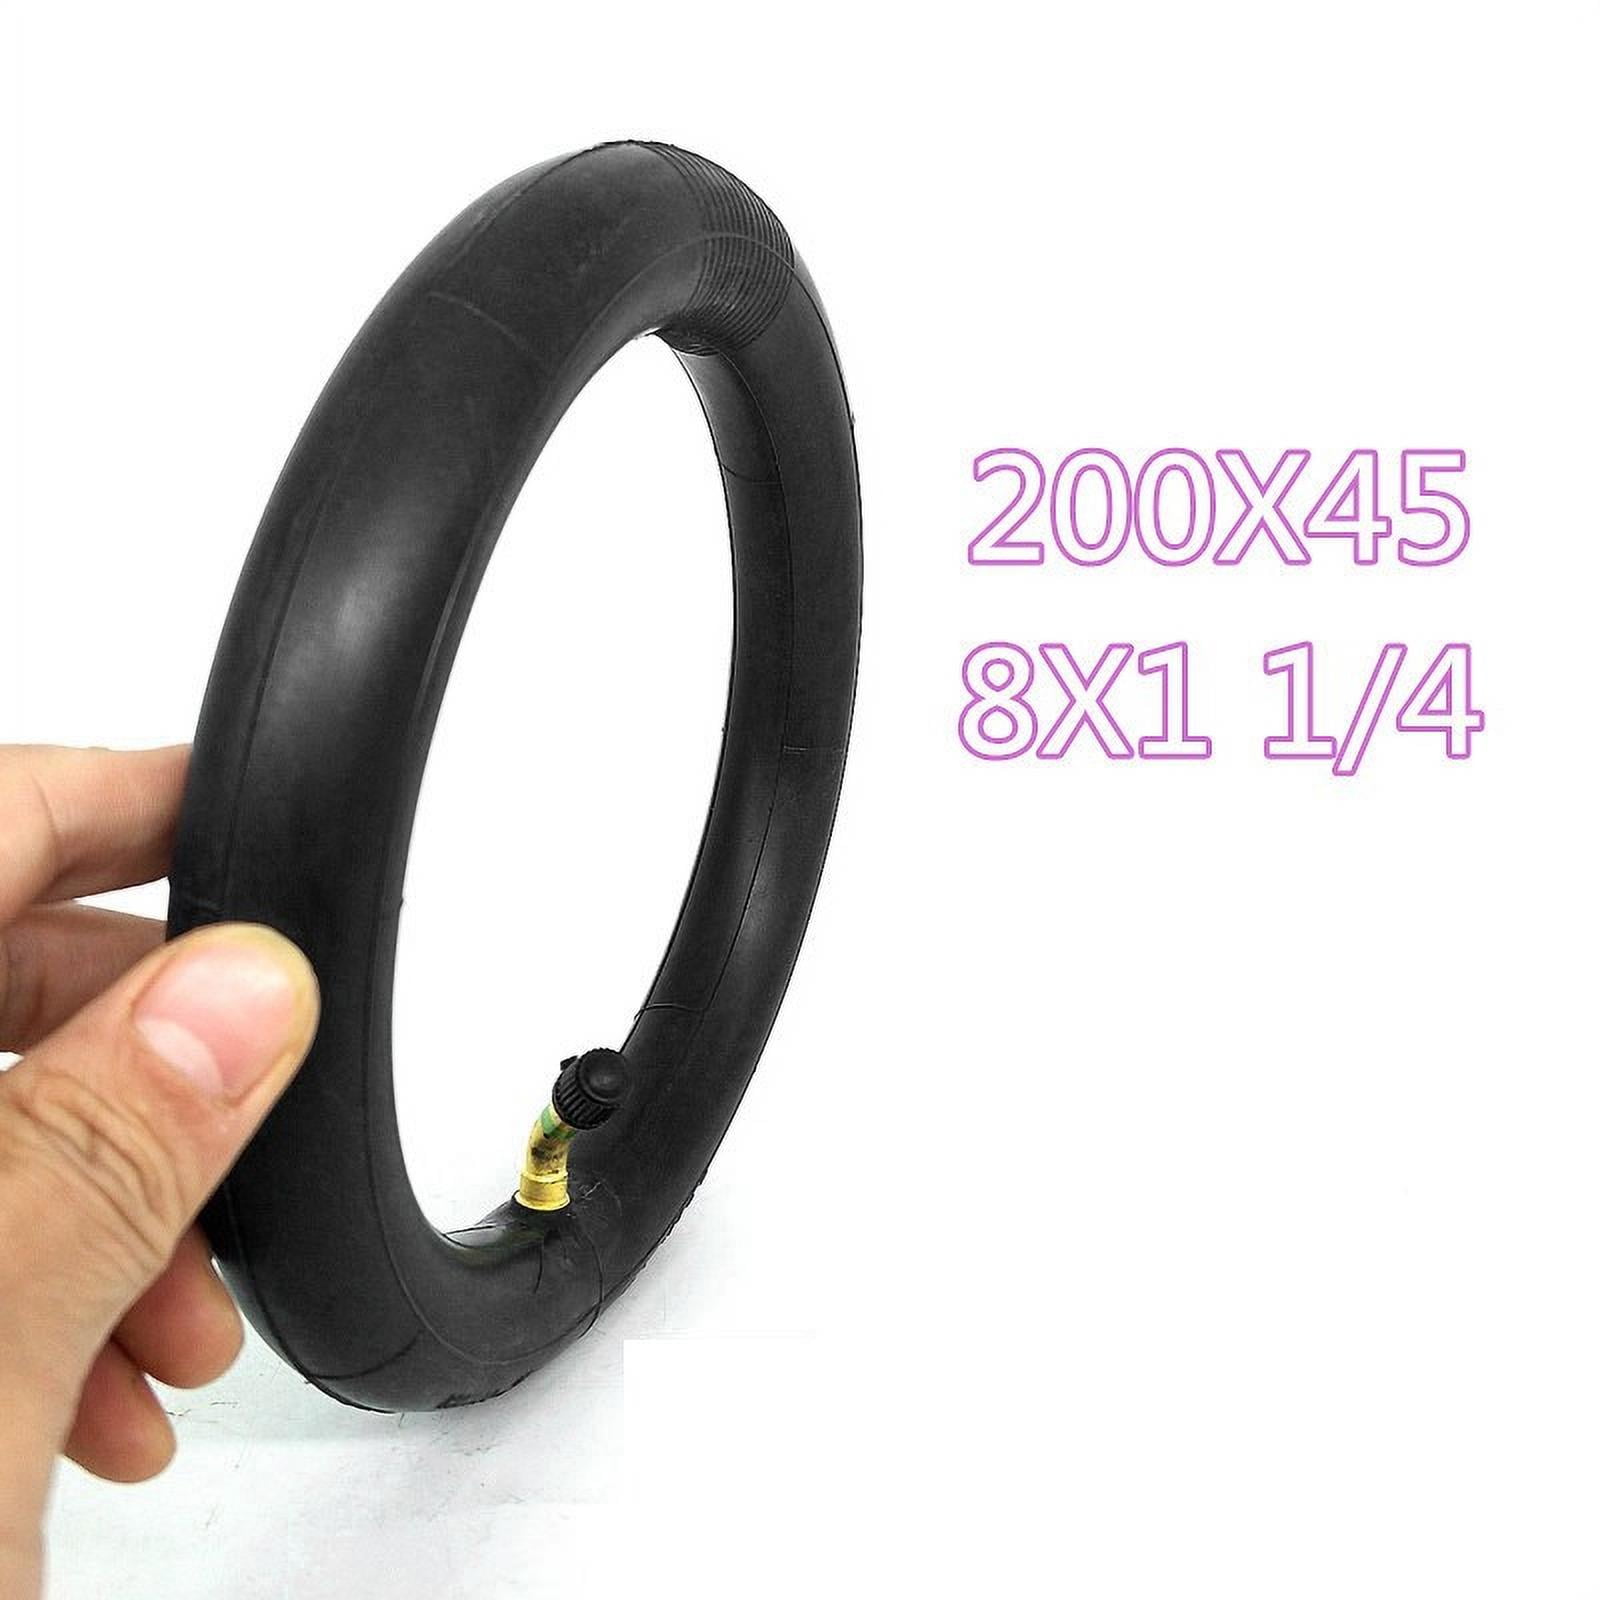 Electric Scooter Tire Tool Parts 8 Inch 8X1 1/4 Inner Tube 200x45 For Stroller 